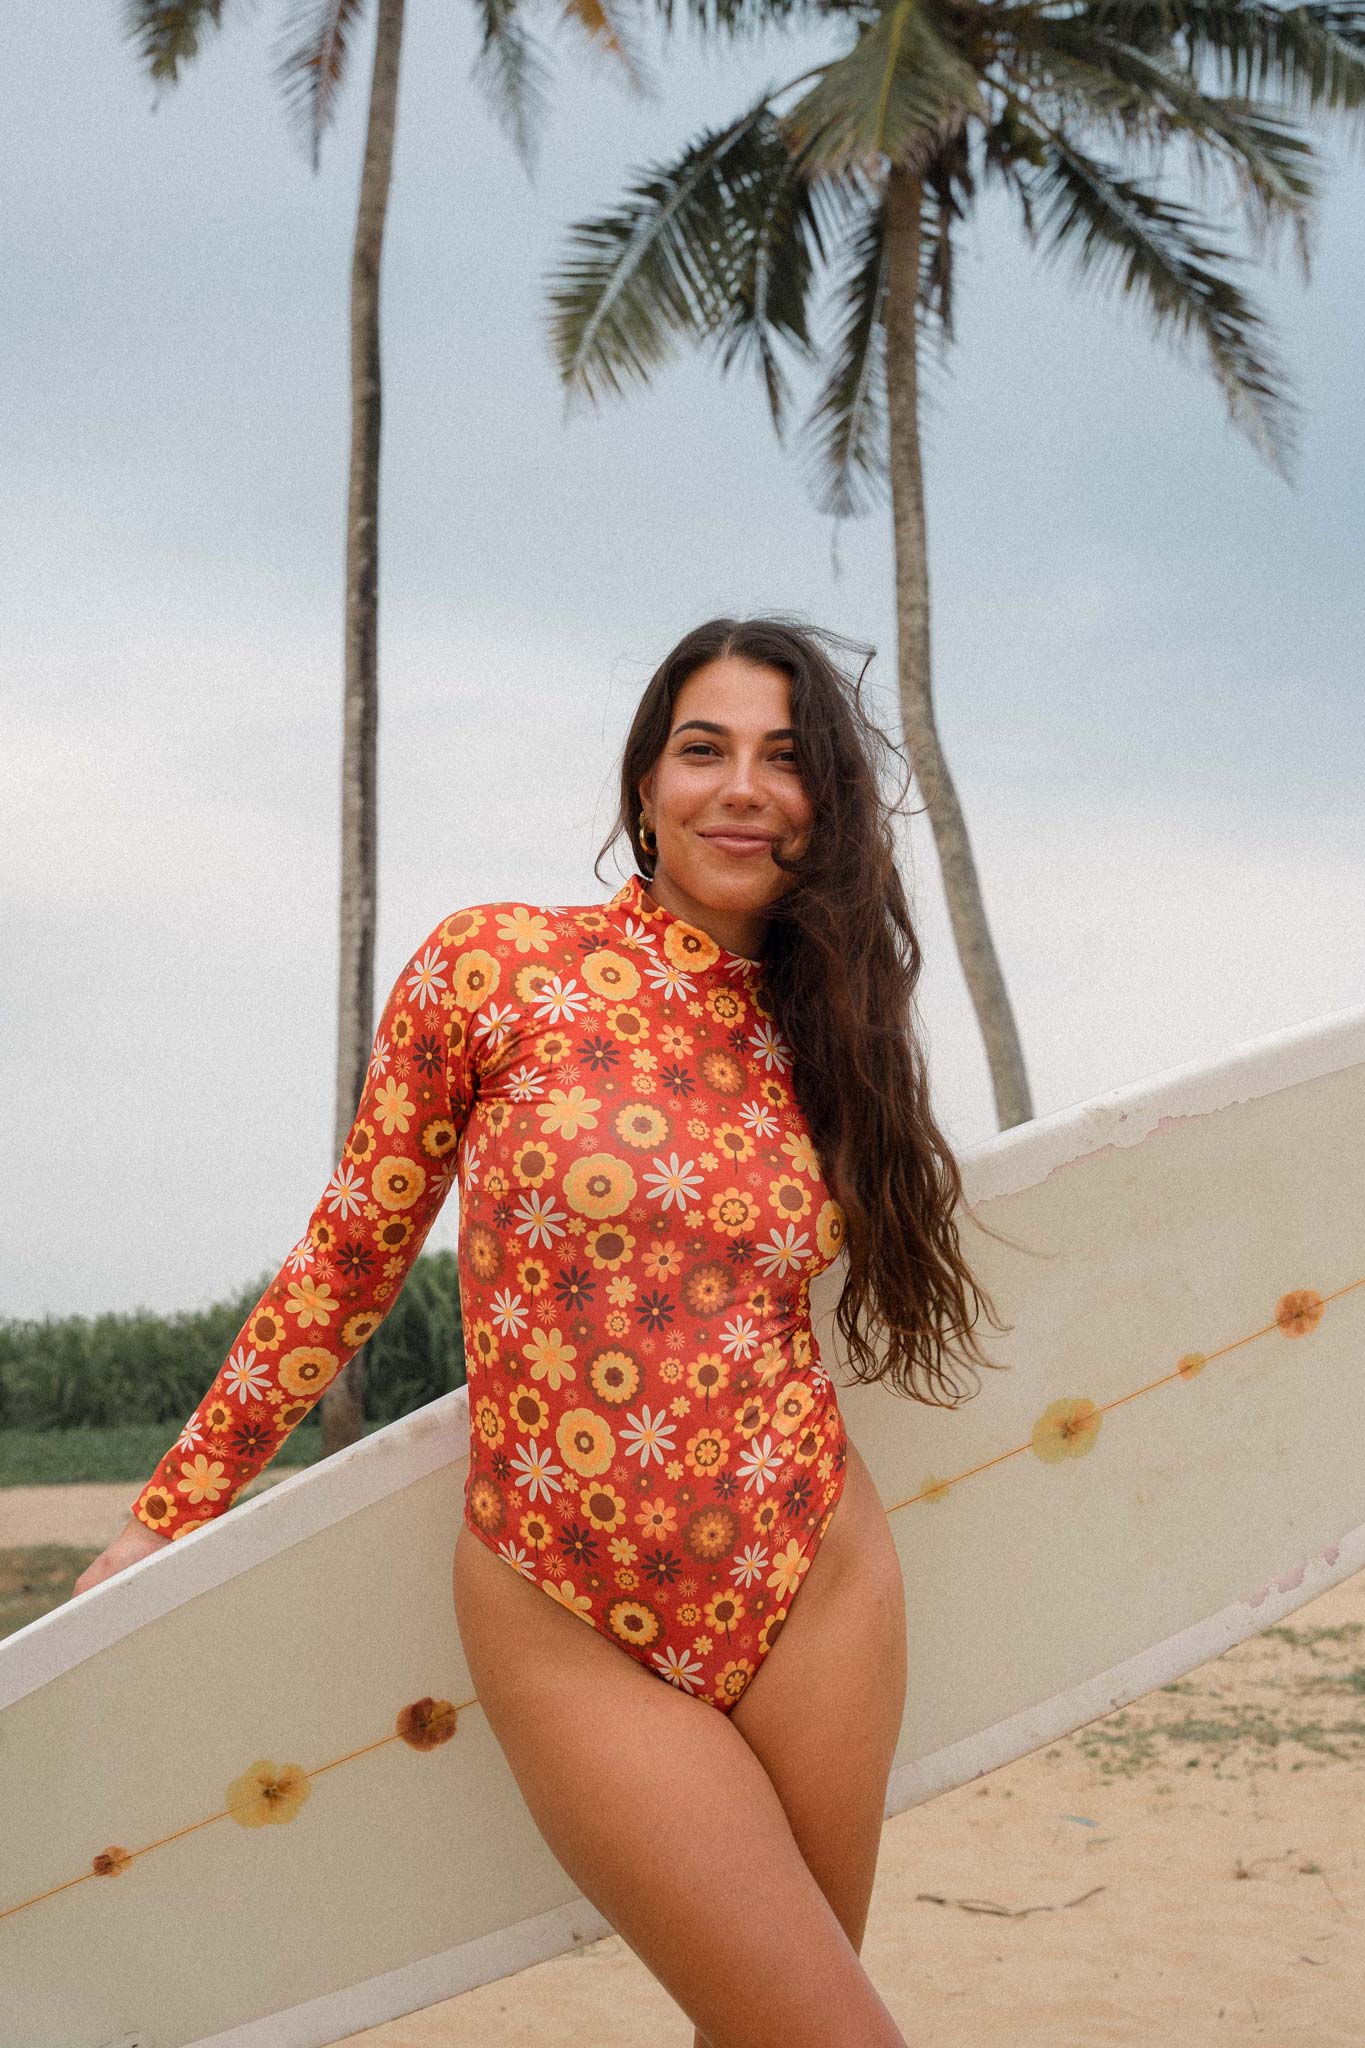 Model posing at the beach with a surfboard wearing the long sleeve surf suit with retro floral print